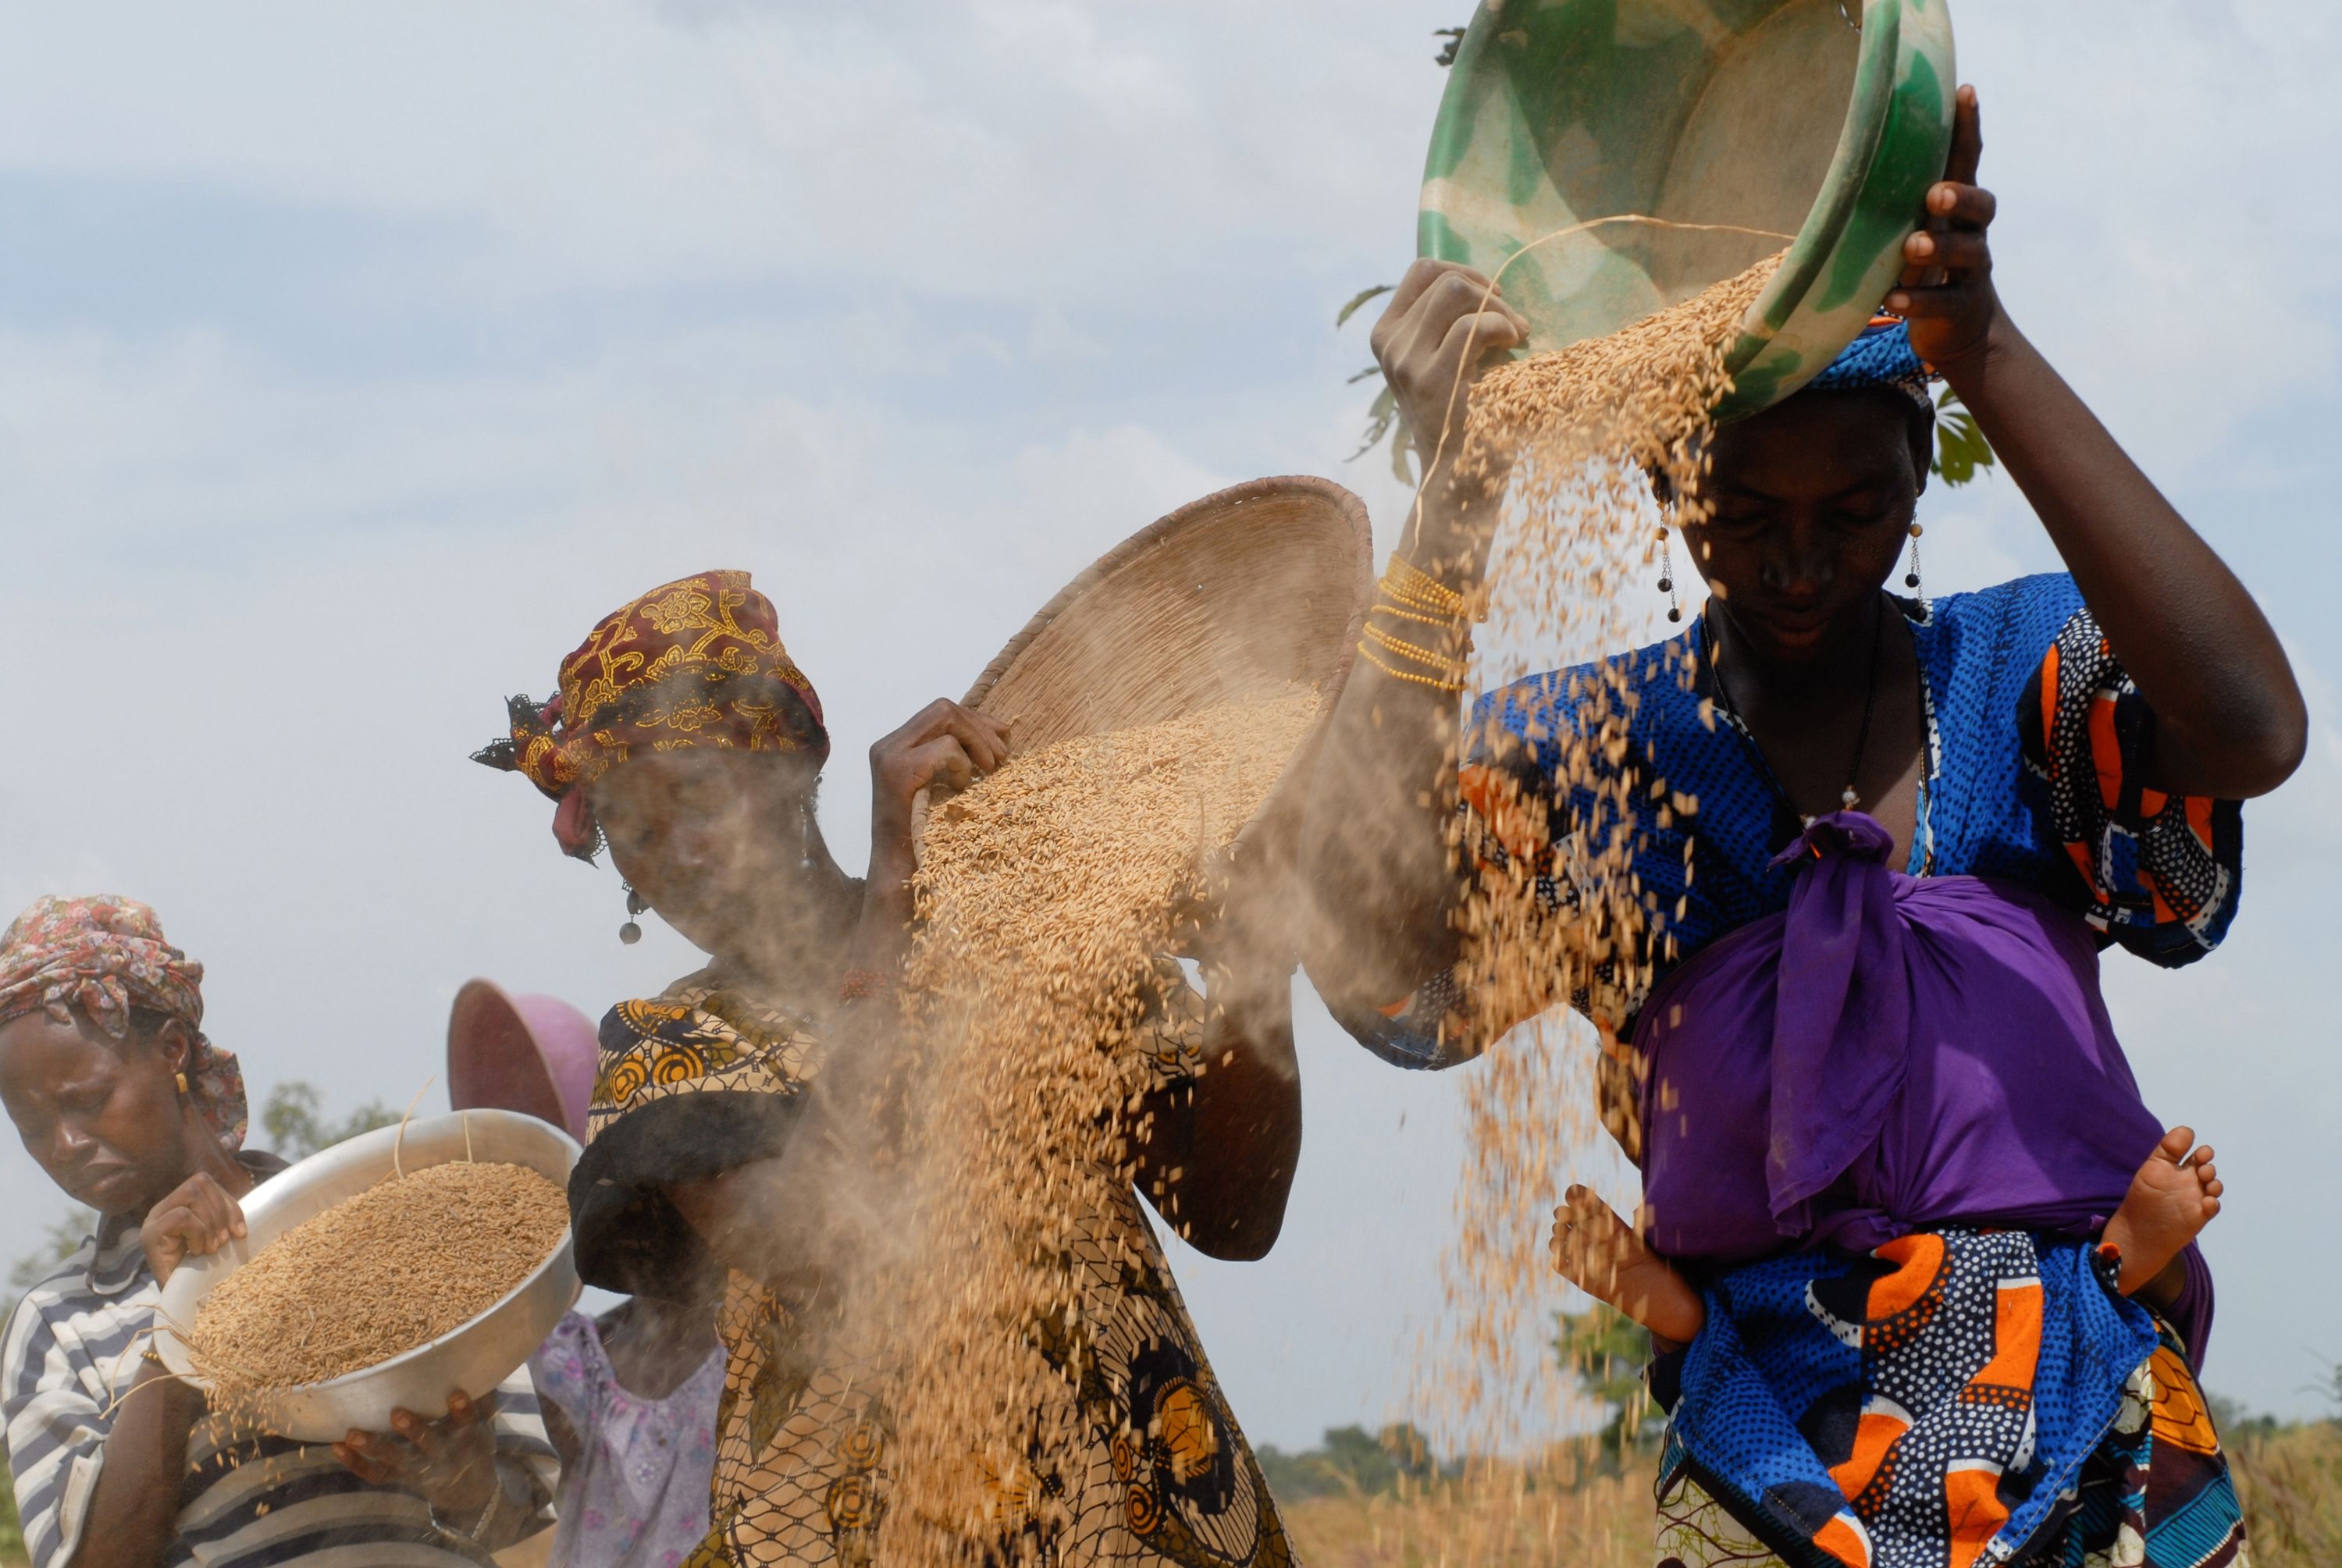 Women thresh rice and separate the chaff from the grain in the village of Banankoro Mali. Photo: Joerg Boethling, GIZ